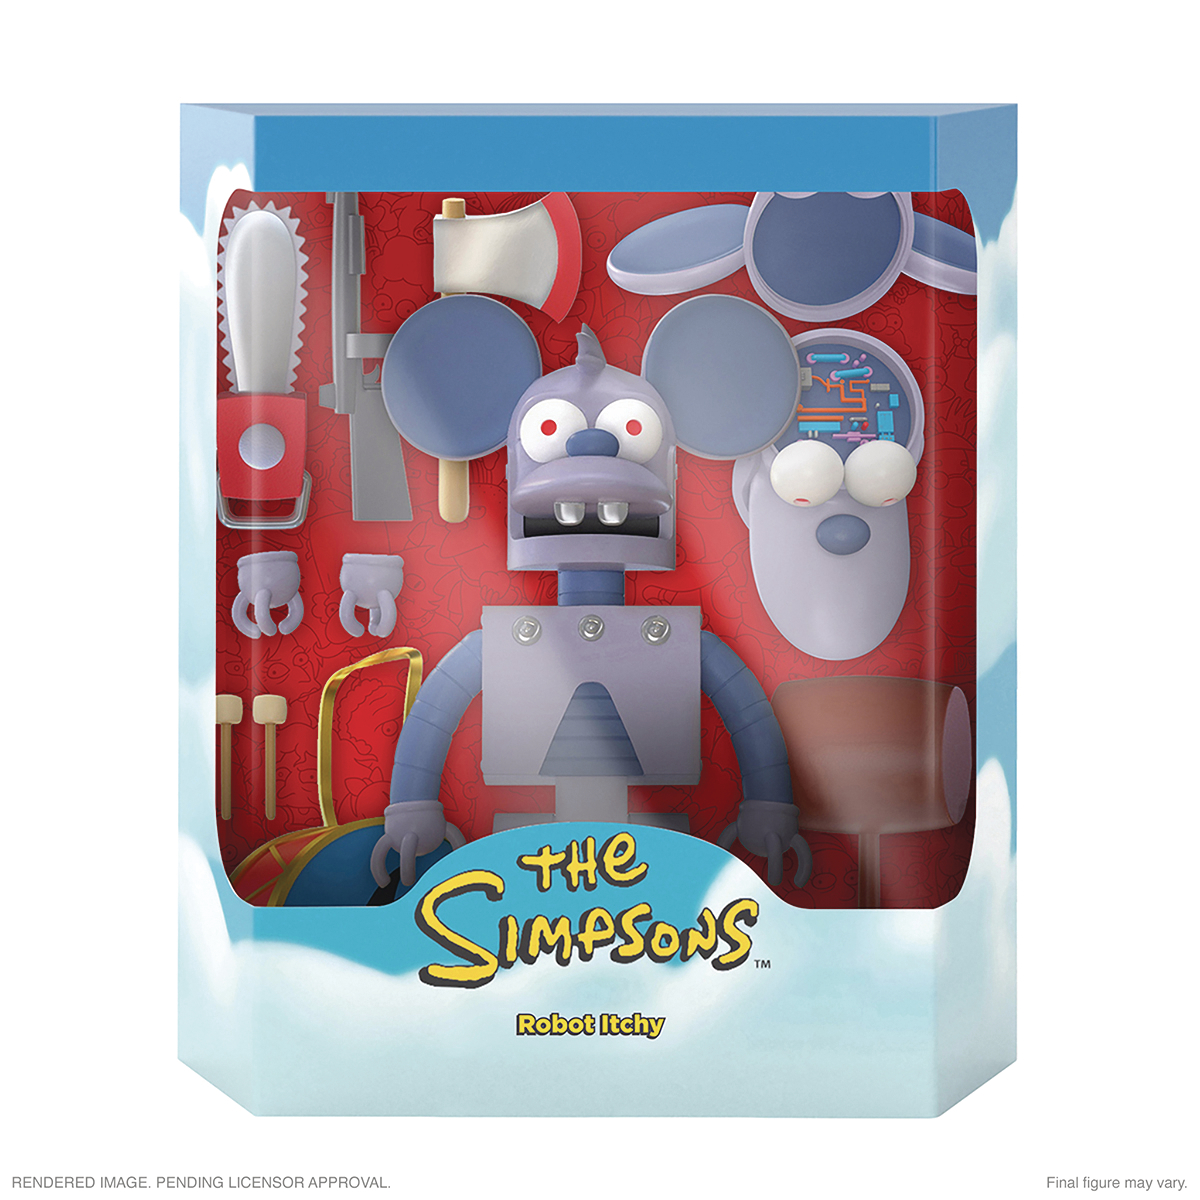 Simpsons Ultimates Robot Itchy Action Figure